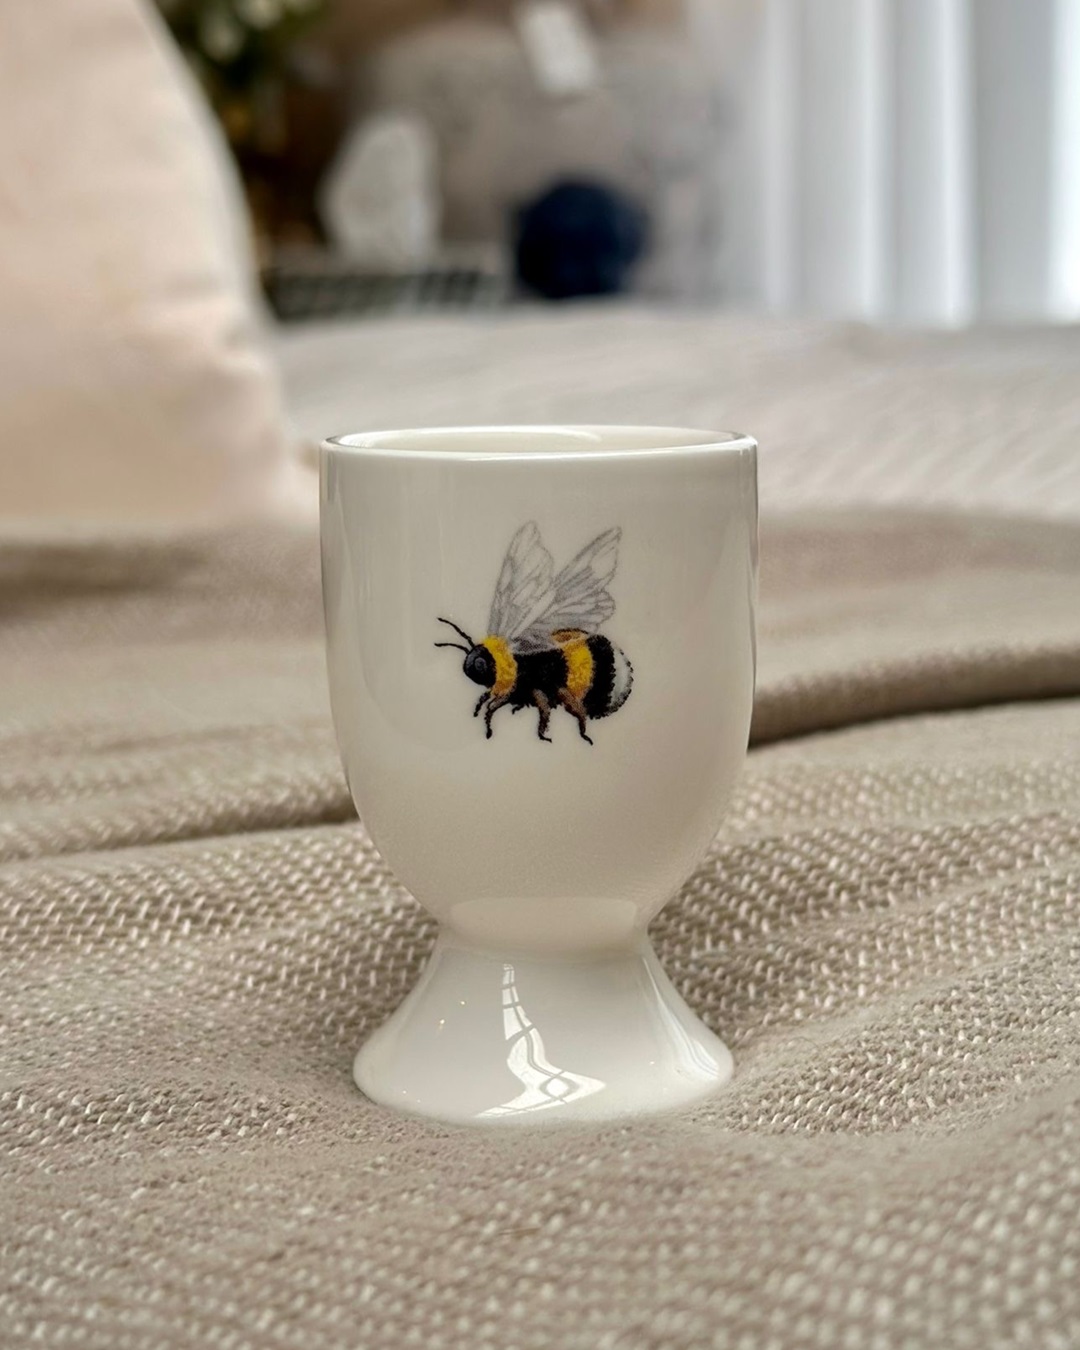 White egg cup with bumble bees on it